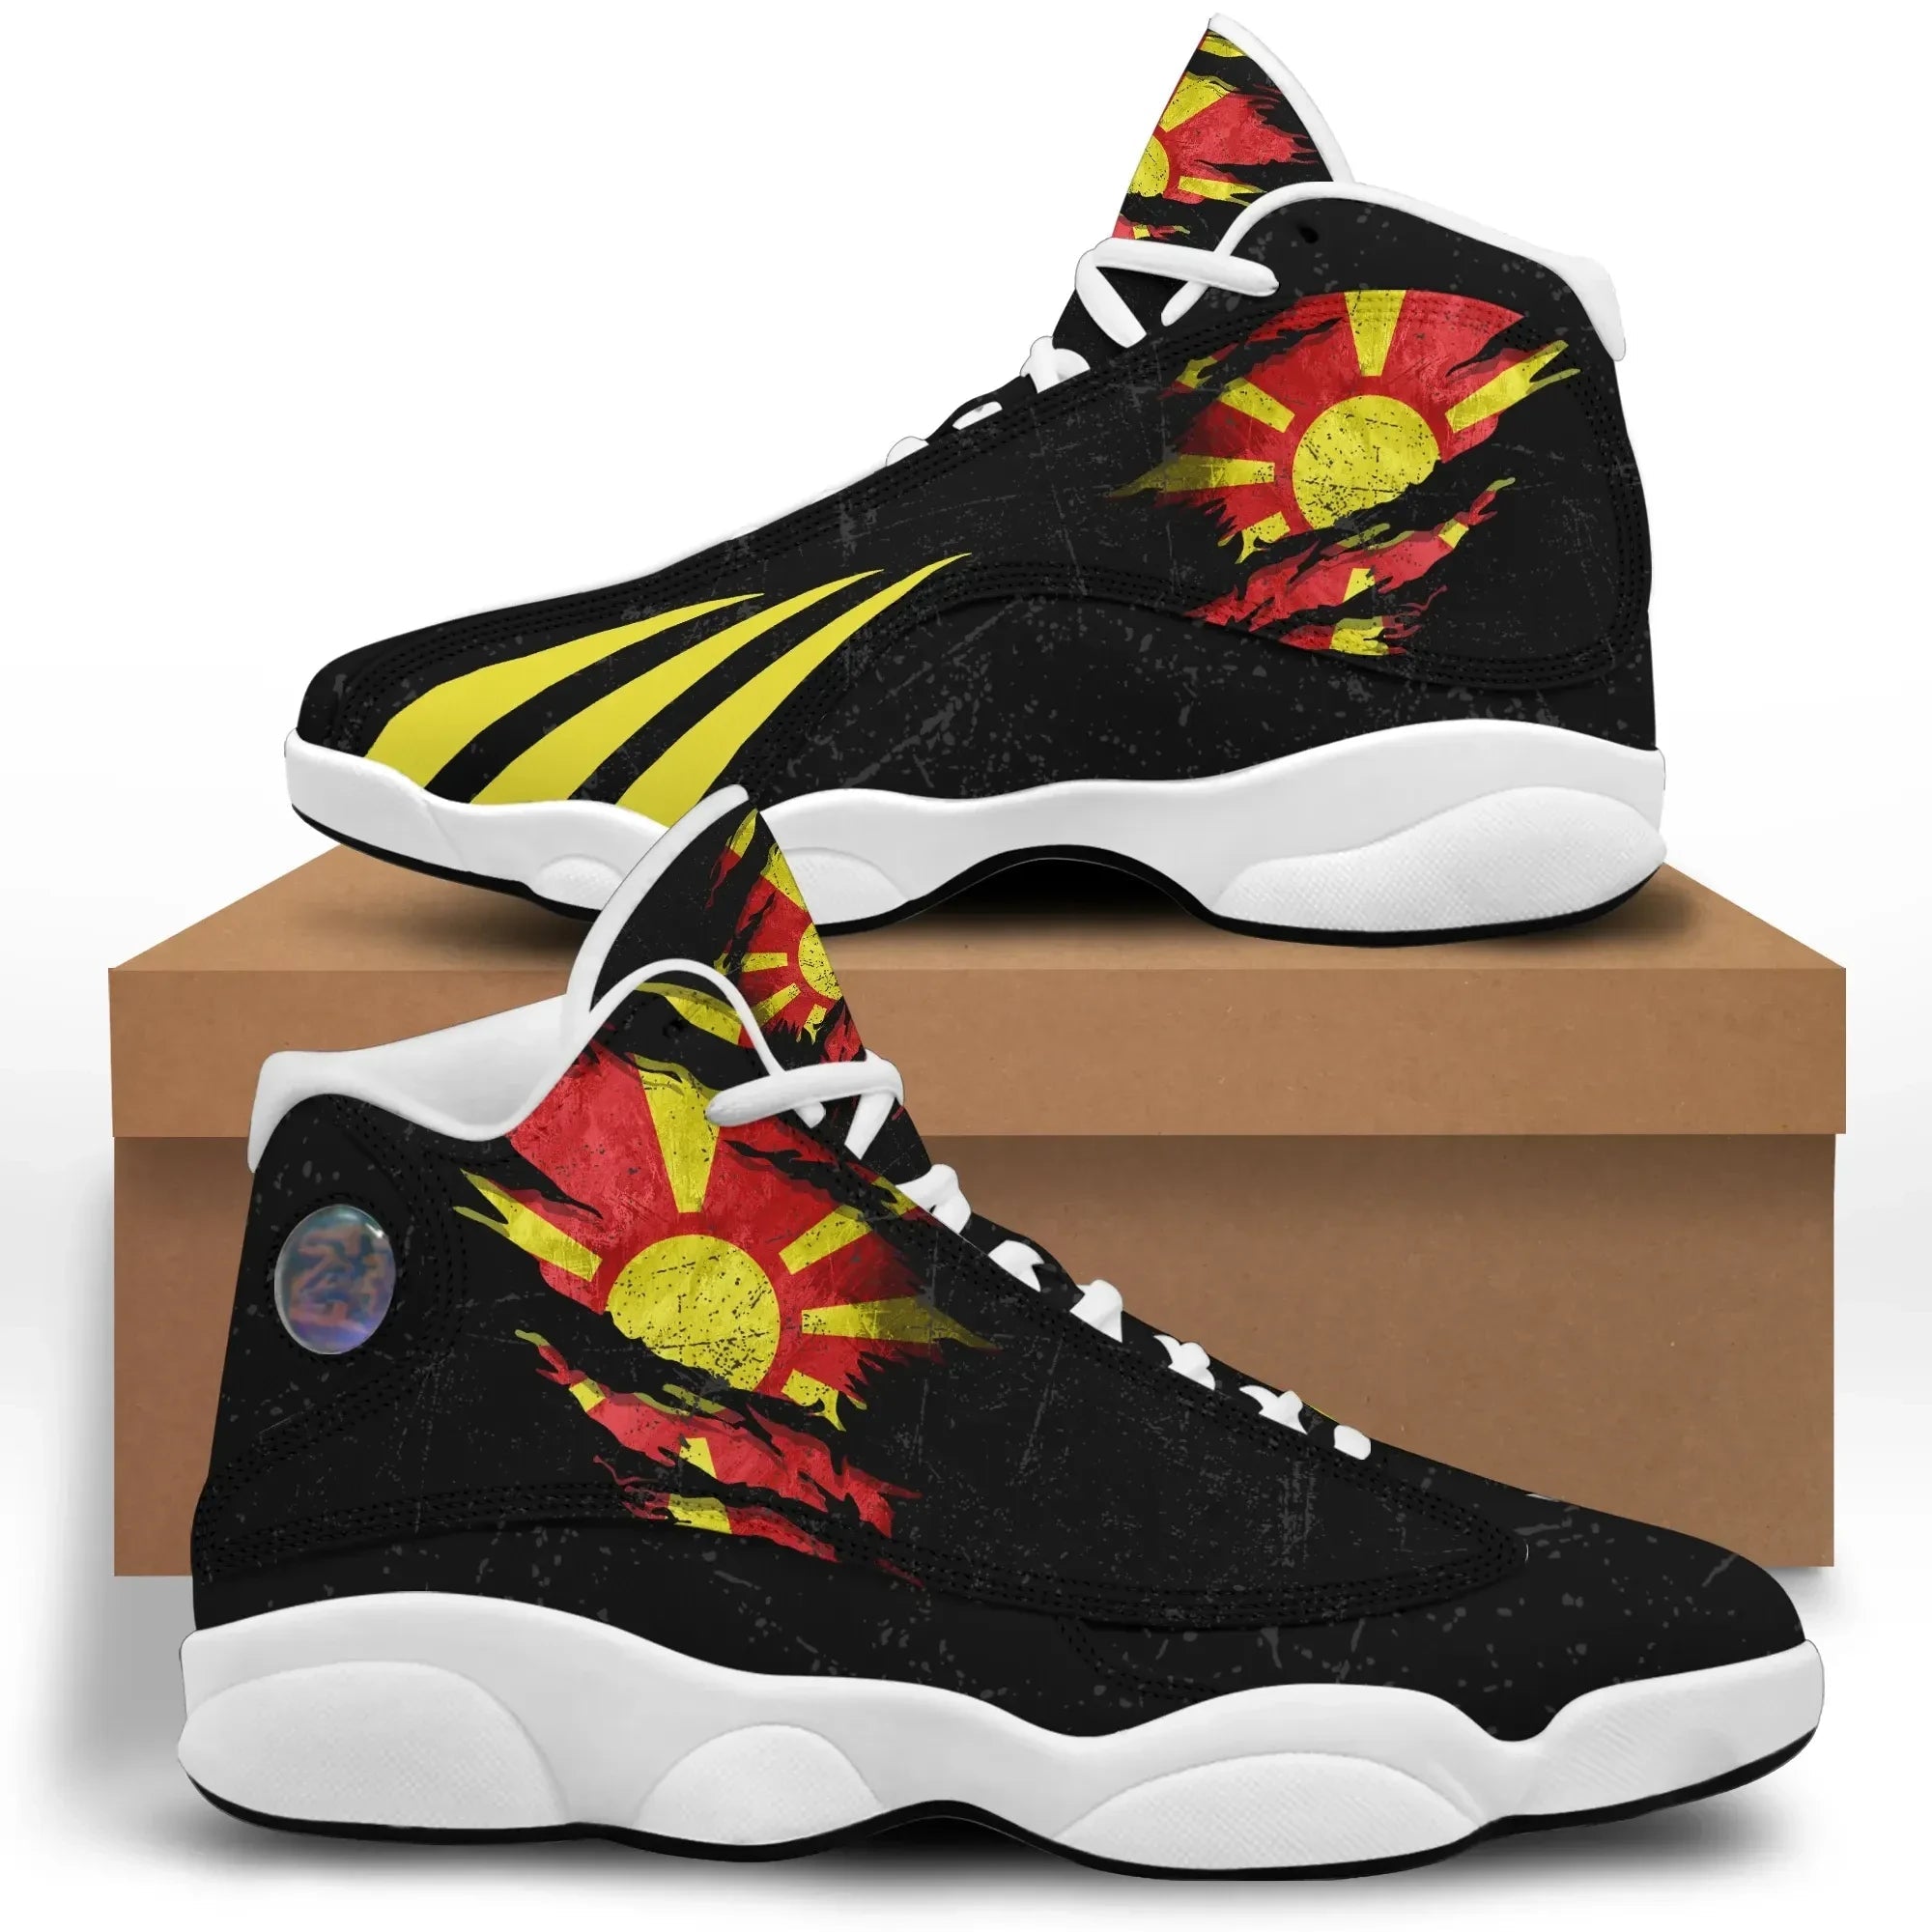 north-macedonia-in-me-high-top-sneakers-shoes-special-grunge-style